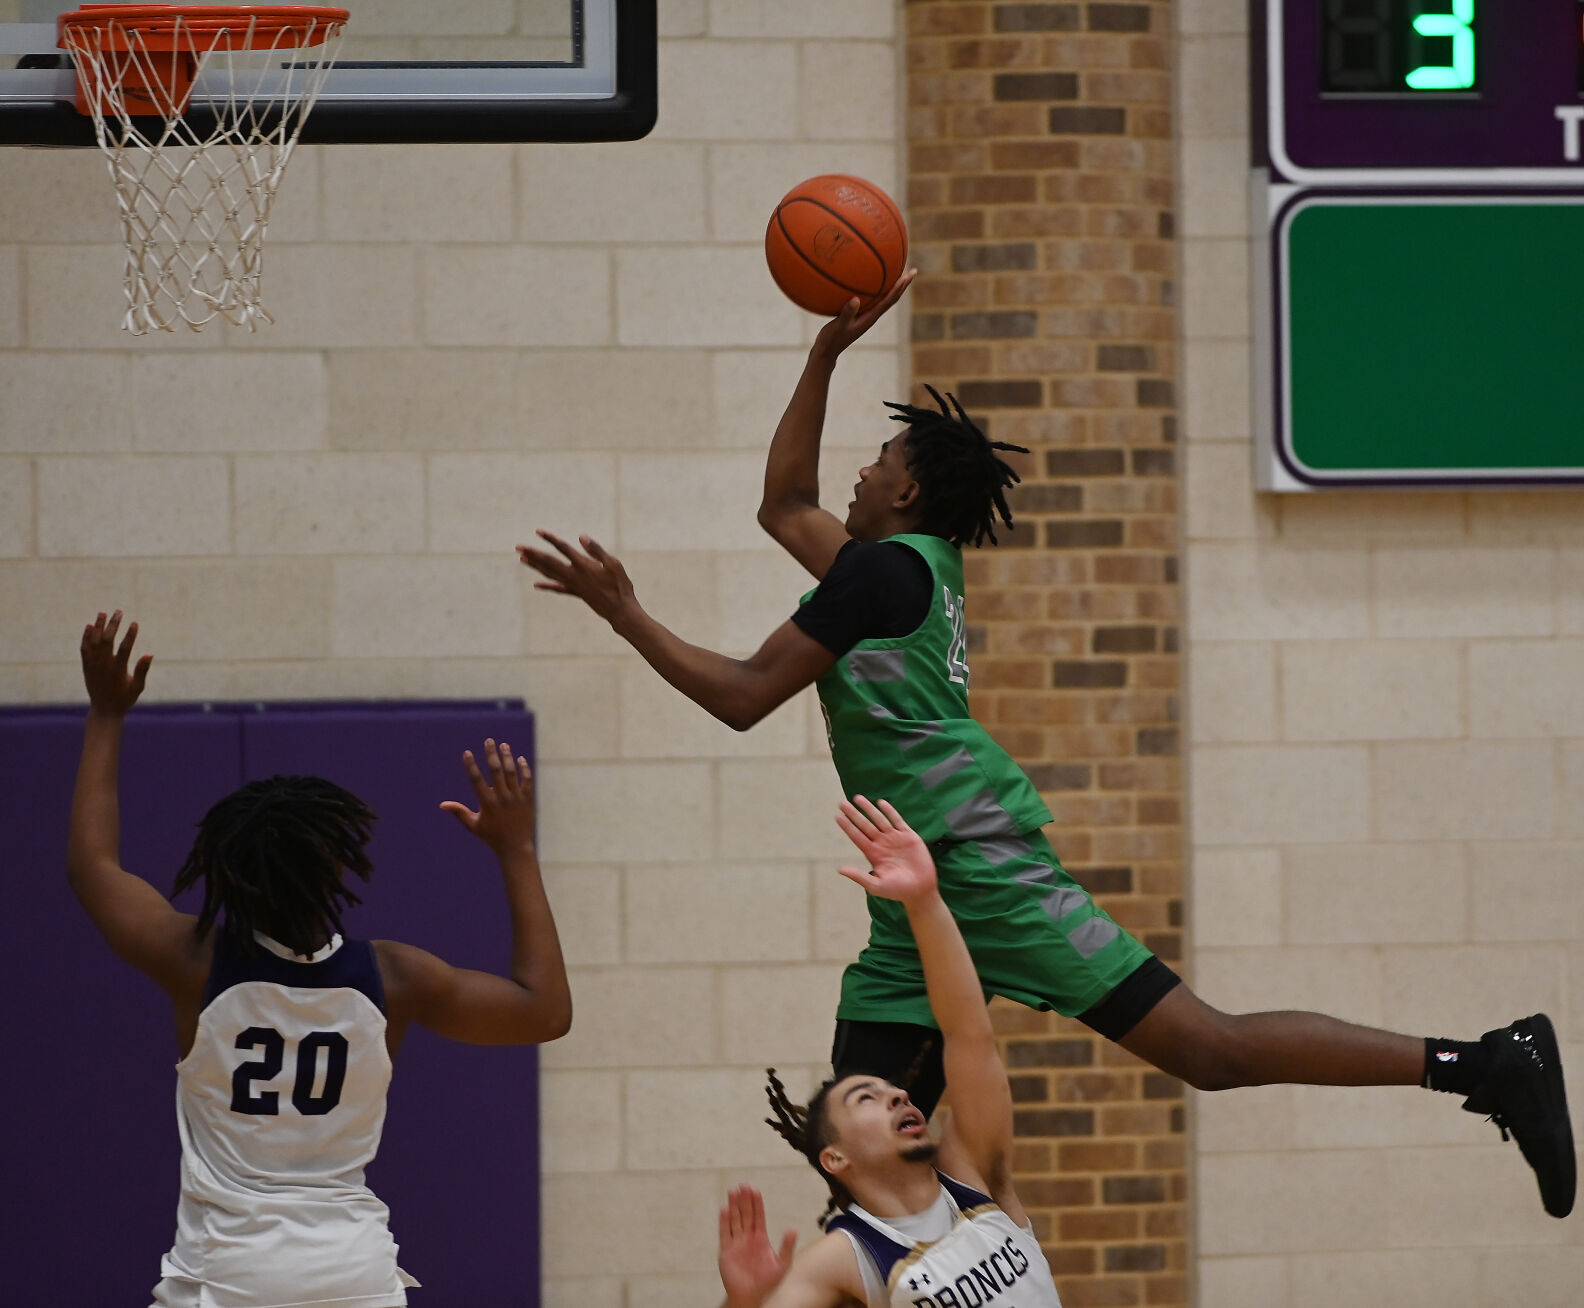 Jalen Brown’s Clutch Free Throws Seal 56-55 Win for Lake Dallas in District Showdown